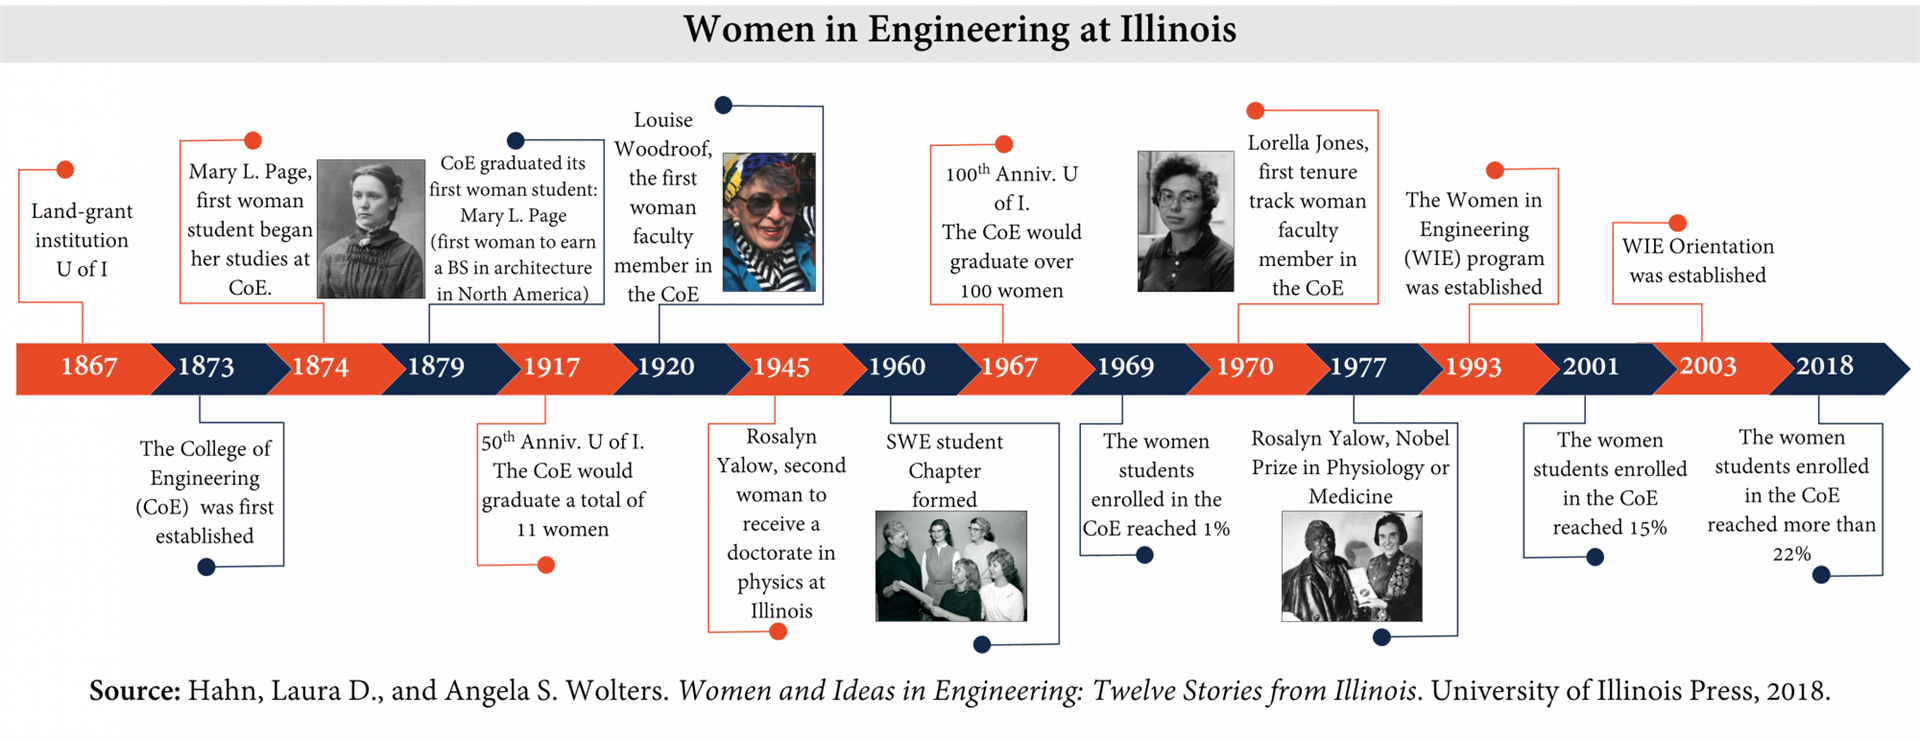 Timeline of WIE at Illinois, beginning in 1827 with the land-grant institution of the University of Illinois through 2018, when women students enrolled in the college of engineering reached more than 22%.